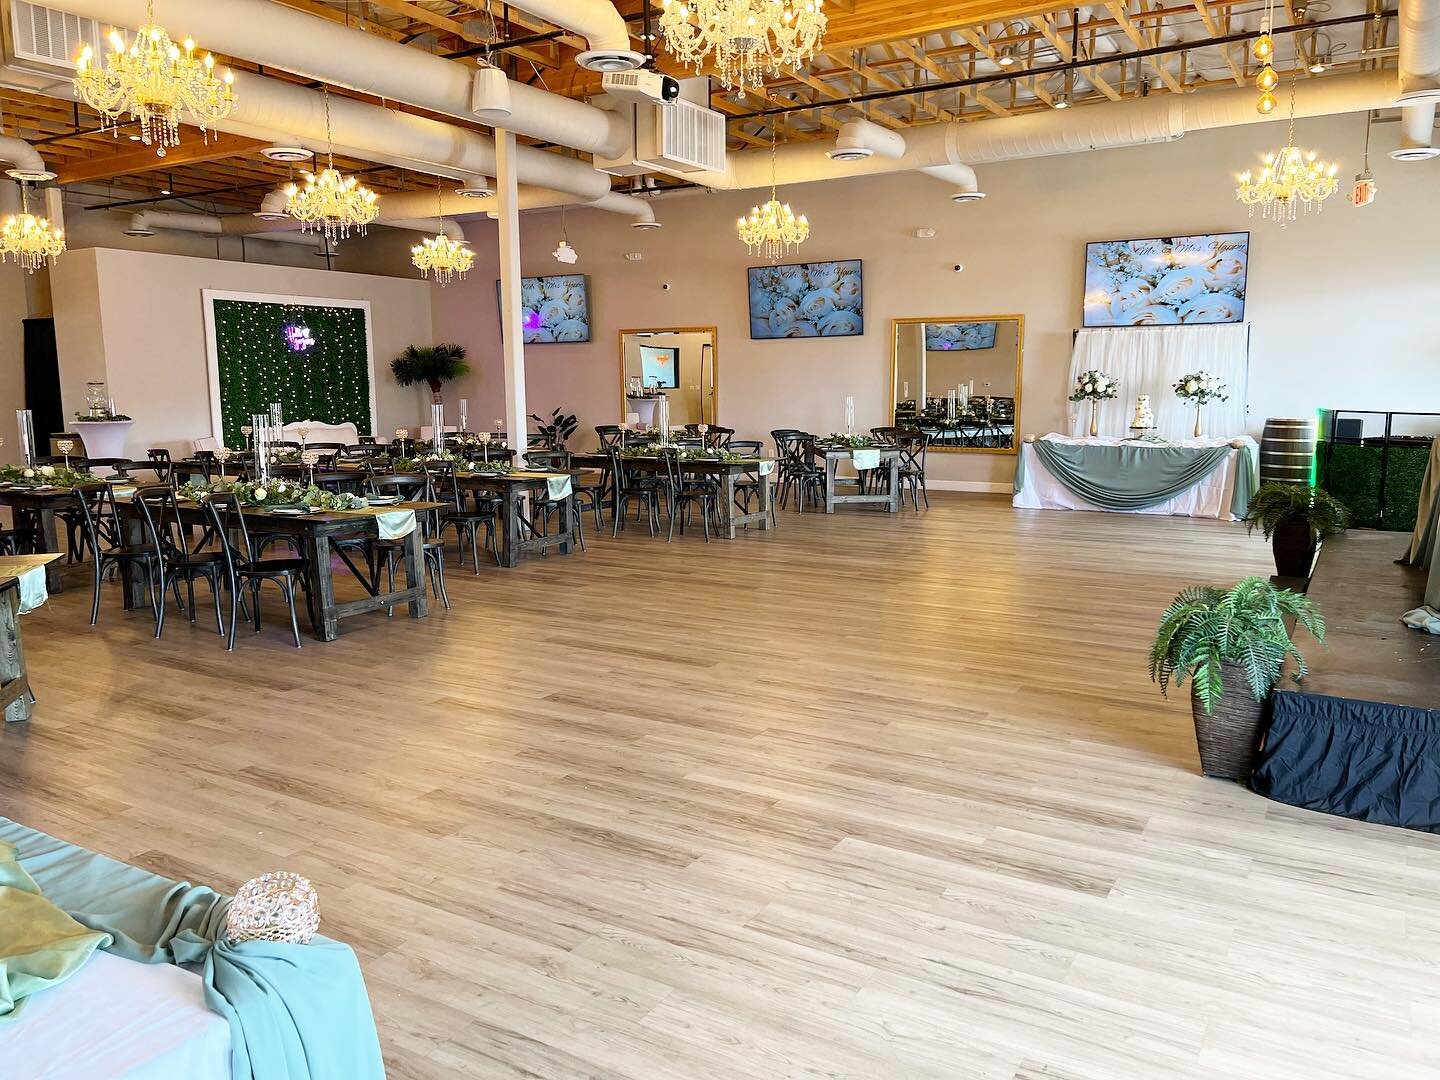 Chinitas Venue has plenty of dance space for your 1st dance, last dance, and everything in between! Come celebrate your special day with us!
☎️ (702)533-2200
💻www.chinitasvenue.com

#2023wedding
#hendersonwedding
#hendersonlocals
#marriedinlasvegas
